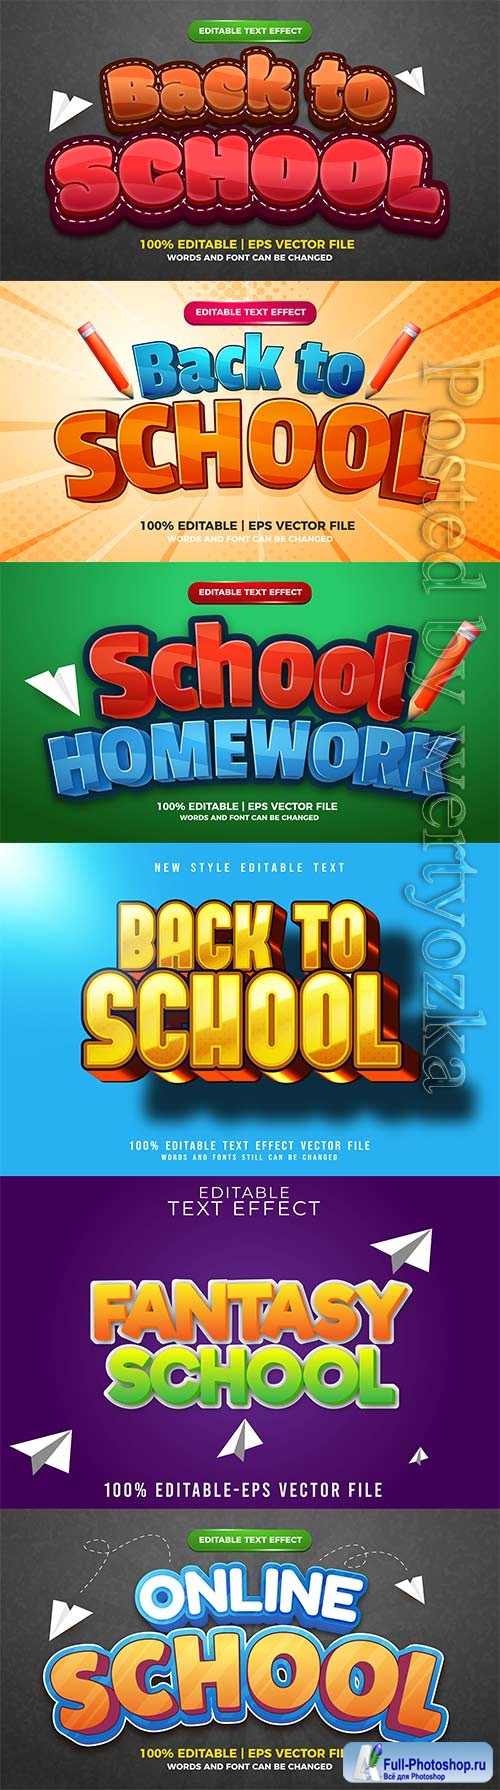 Back to school editable text effect vol 16